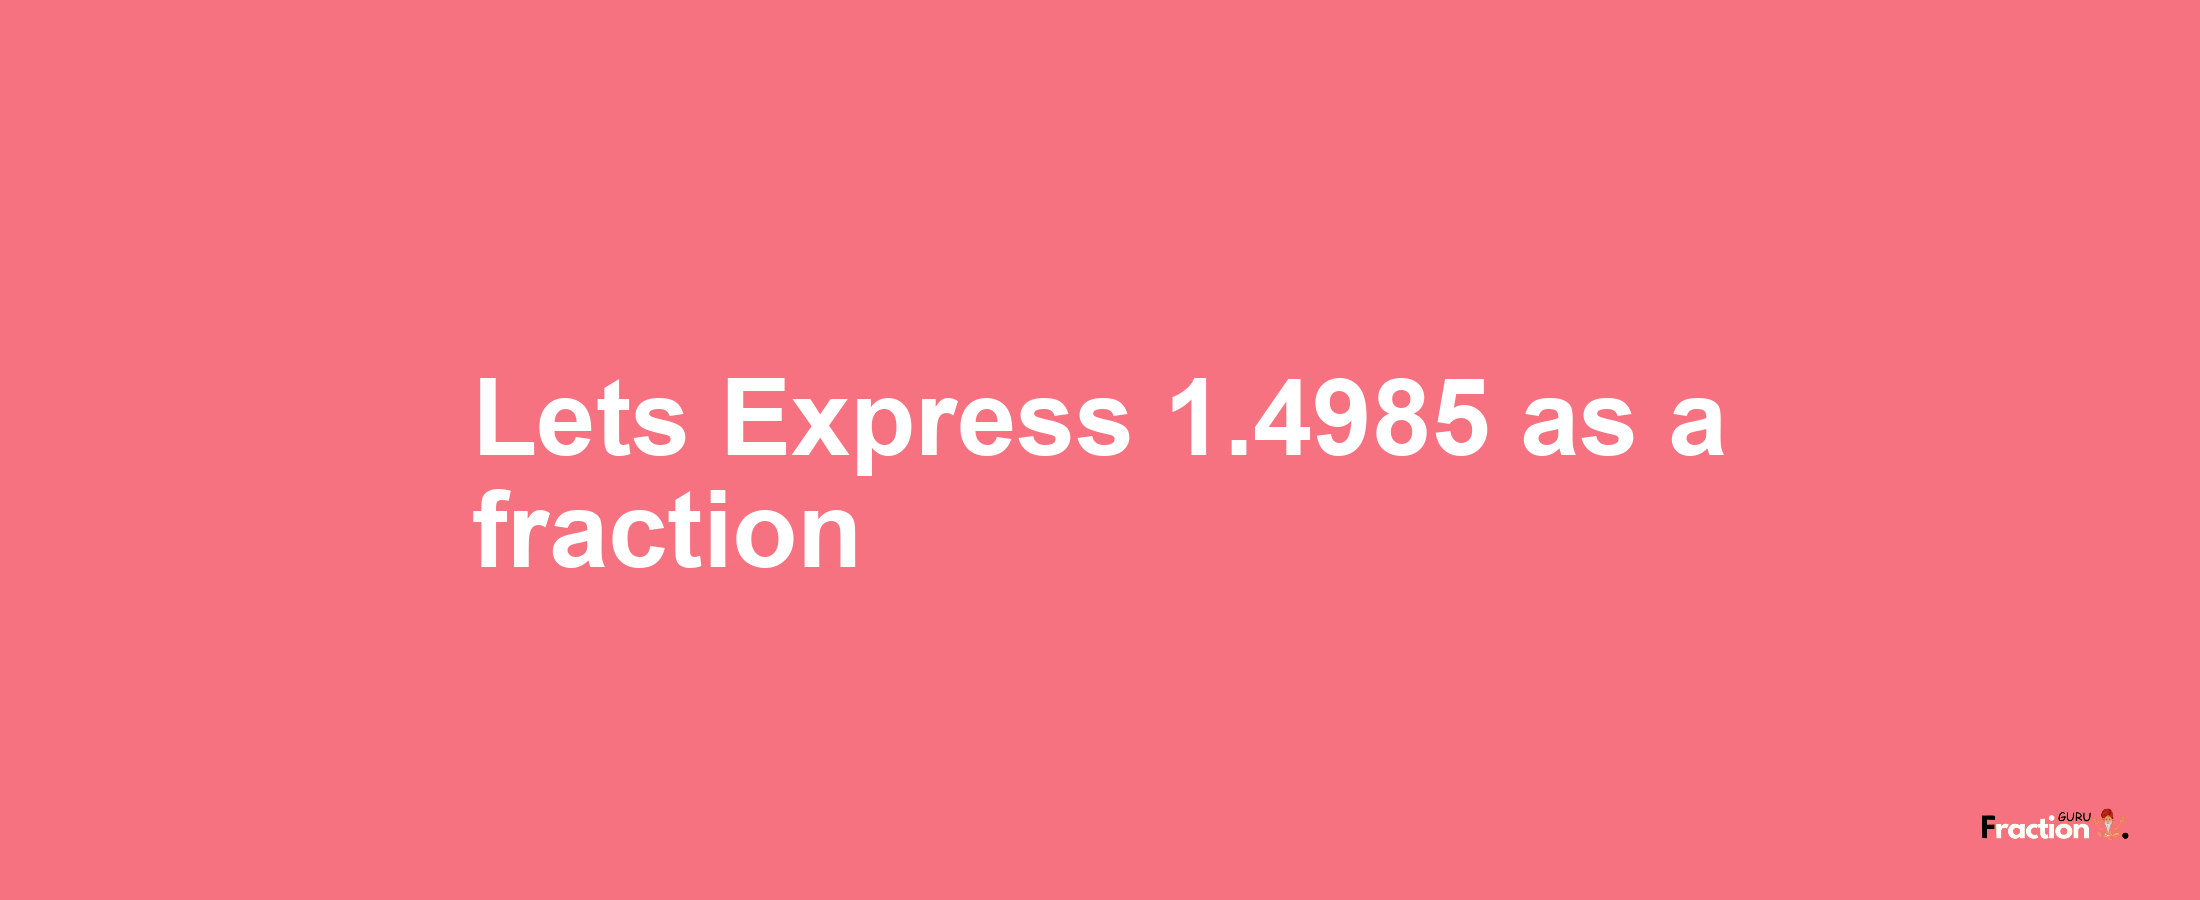 Lets Express 1.4985 as afraction